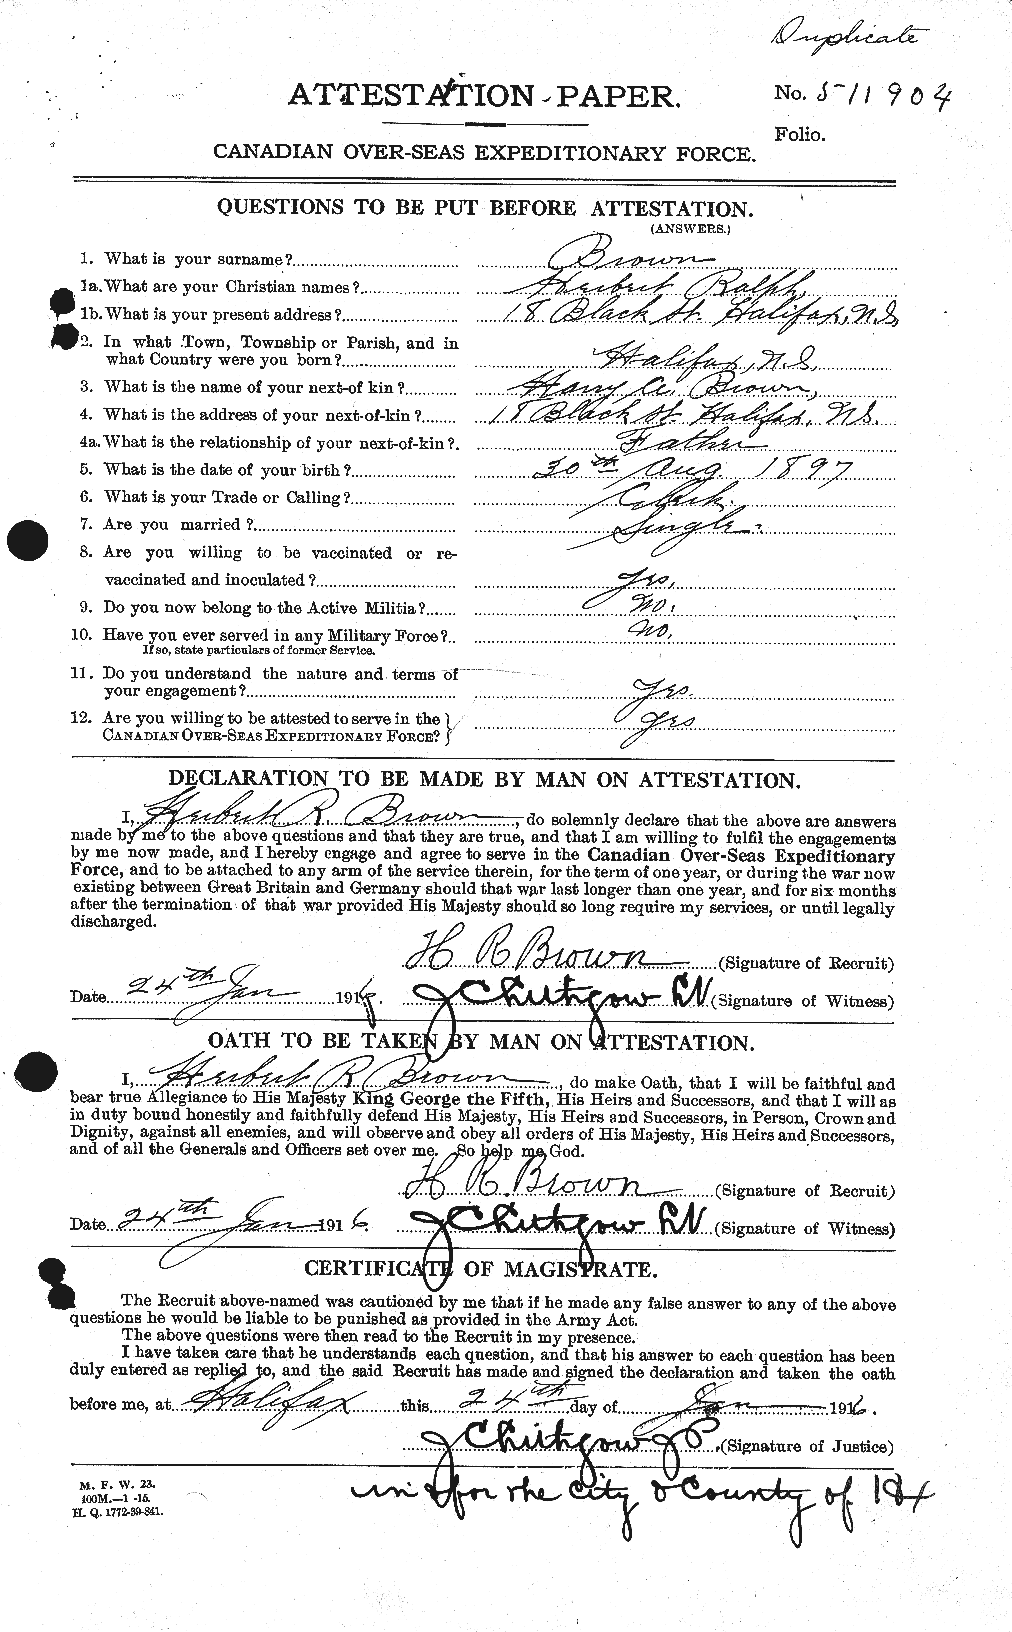 Personnel Records of the First World War - CEF 265585a